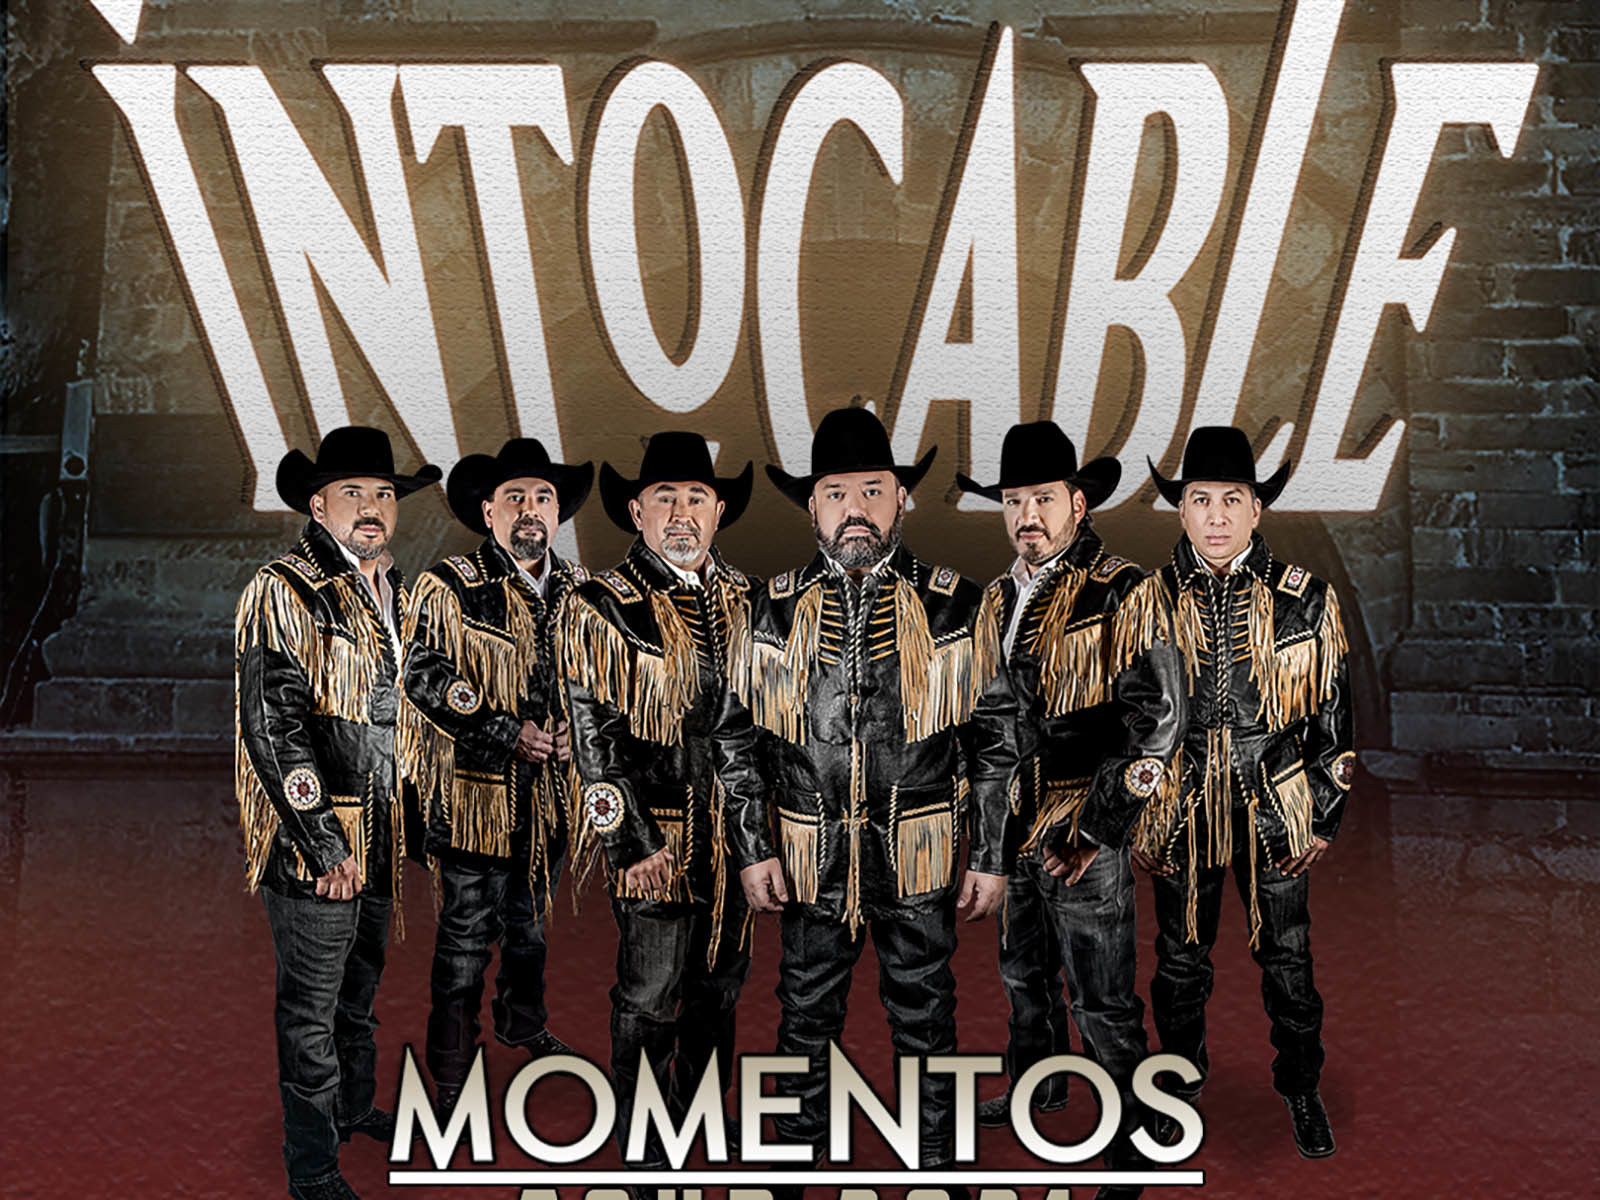 A concert announcement! Intocable is booked at the Riverside